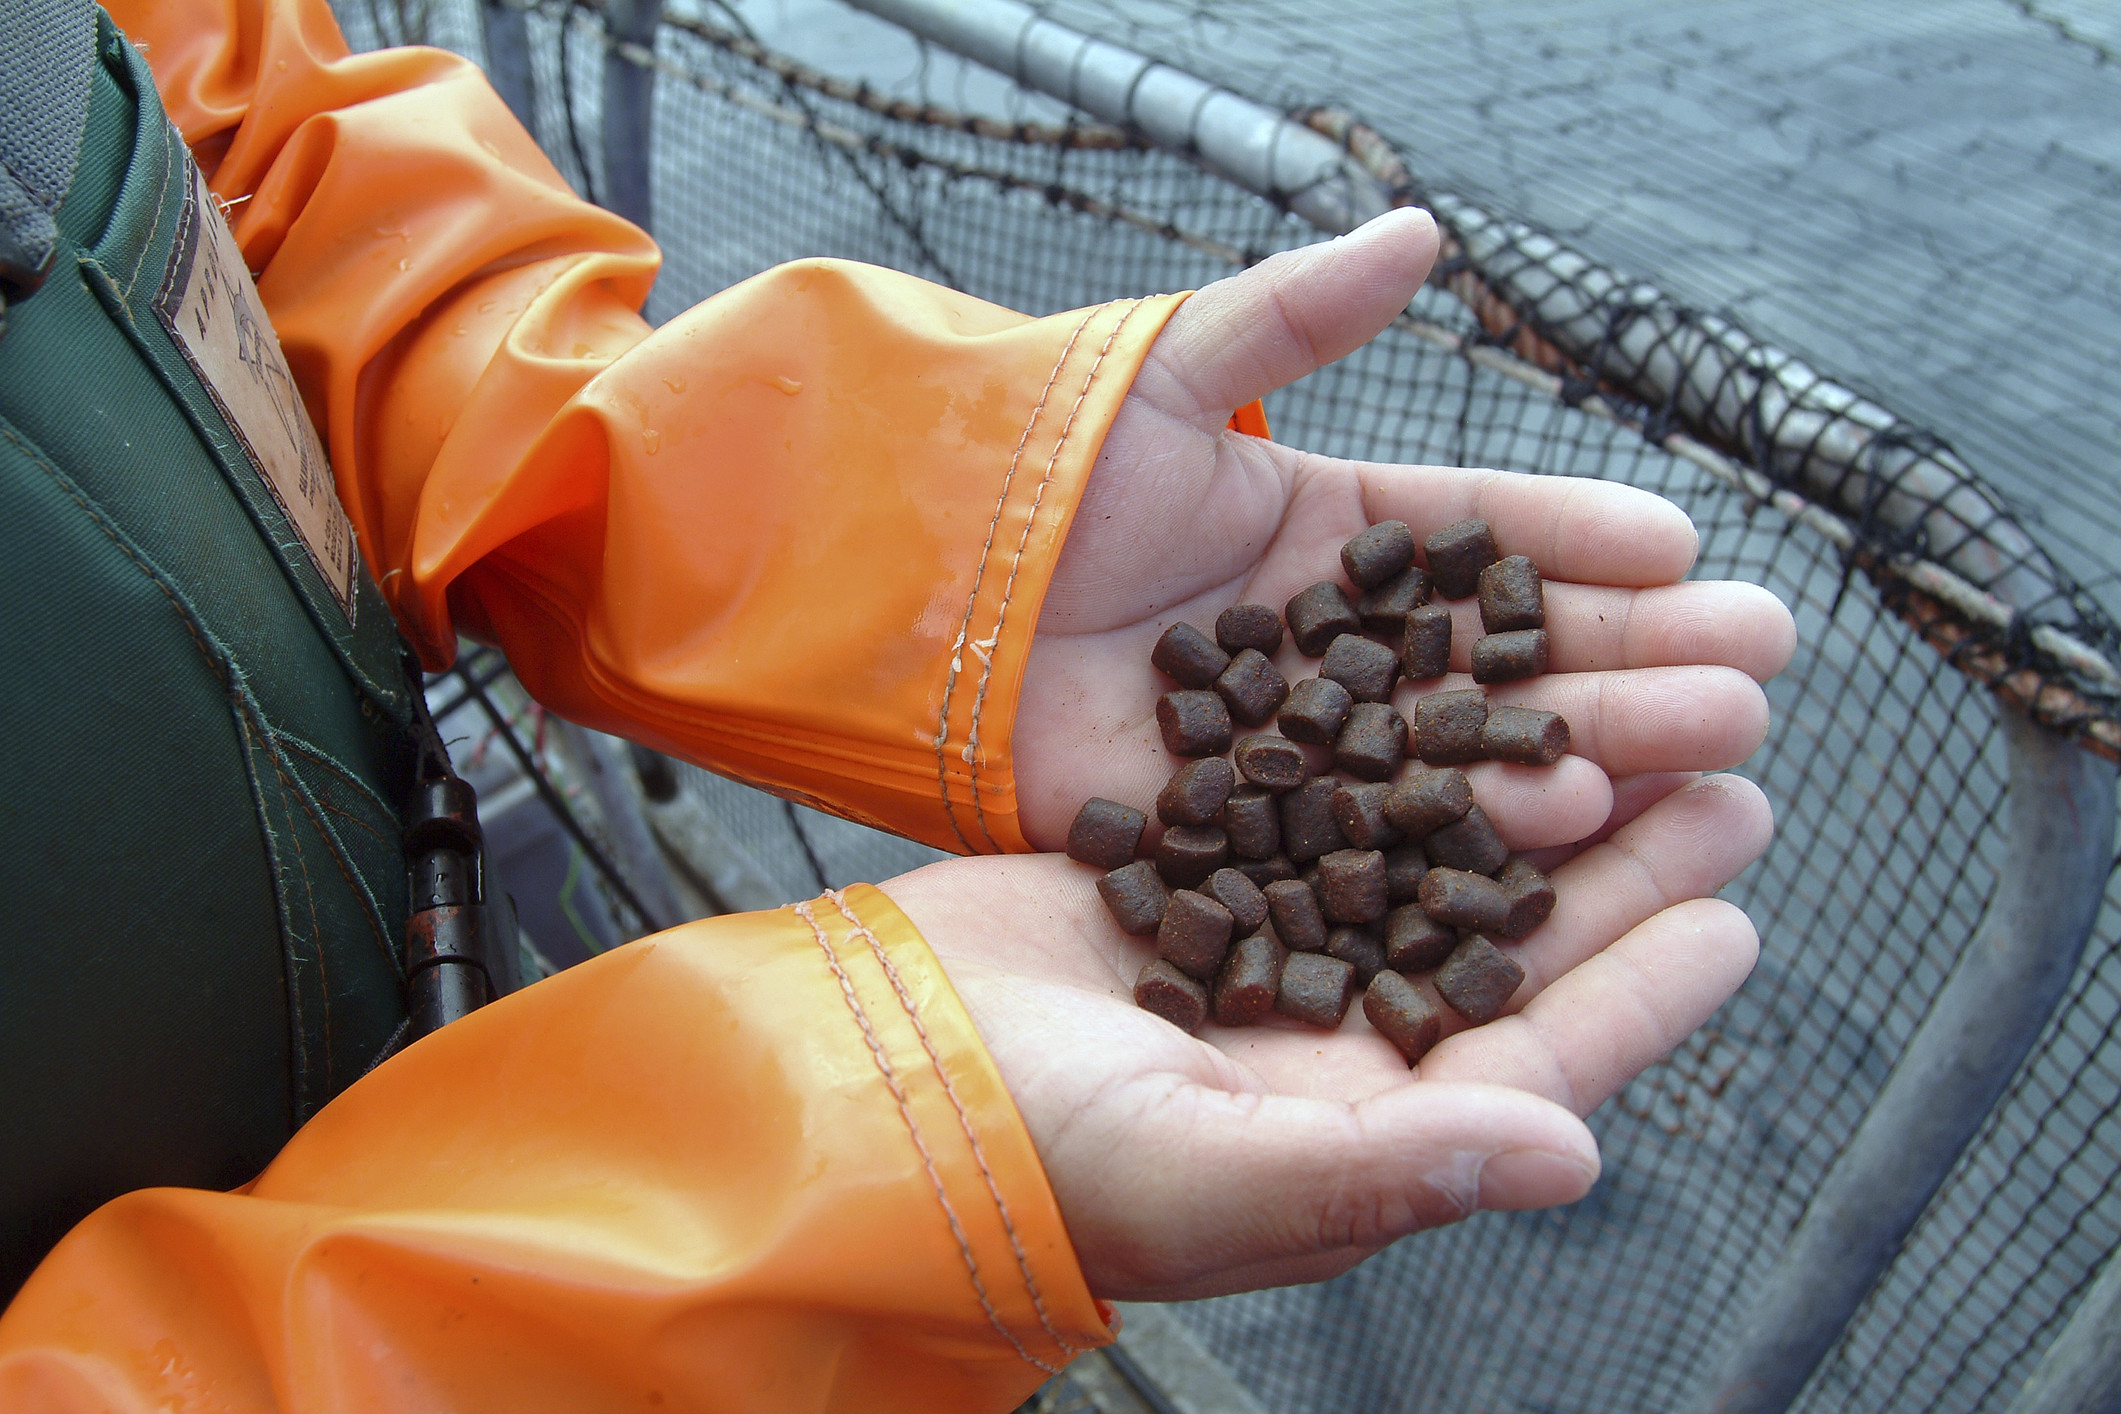 More fish meal, but growing interest in alternatives. Photo: Estudiomj